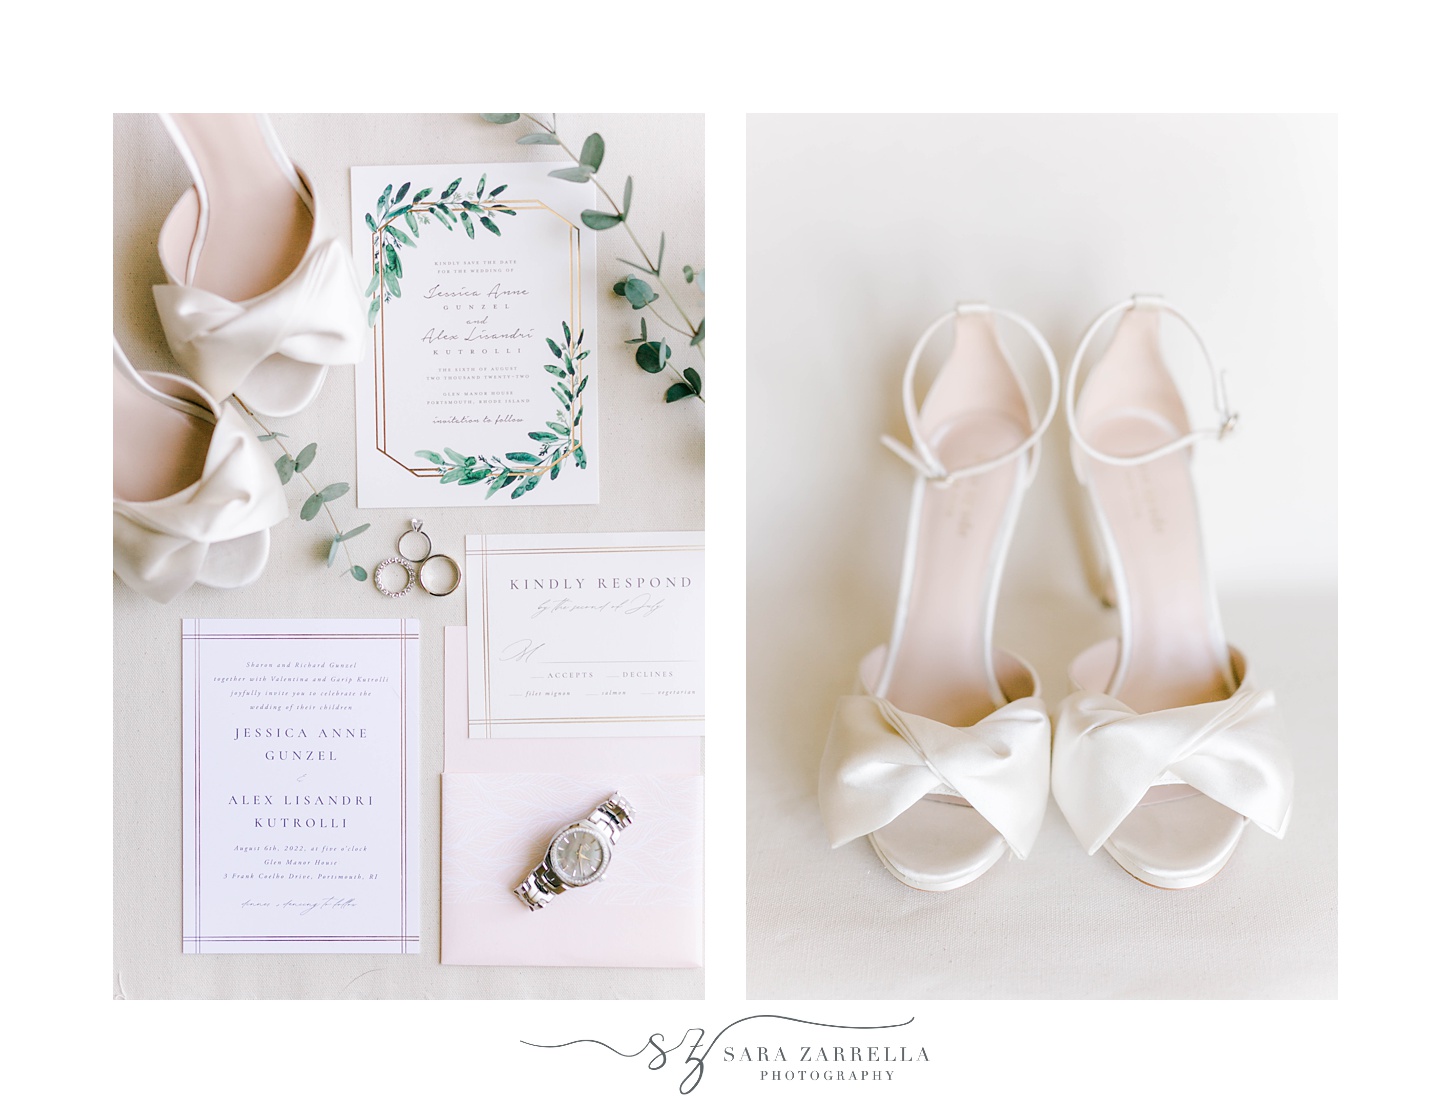 bride's shoes and invitation suite for Glen Manor House wedding